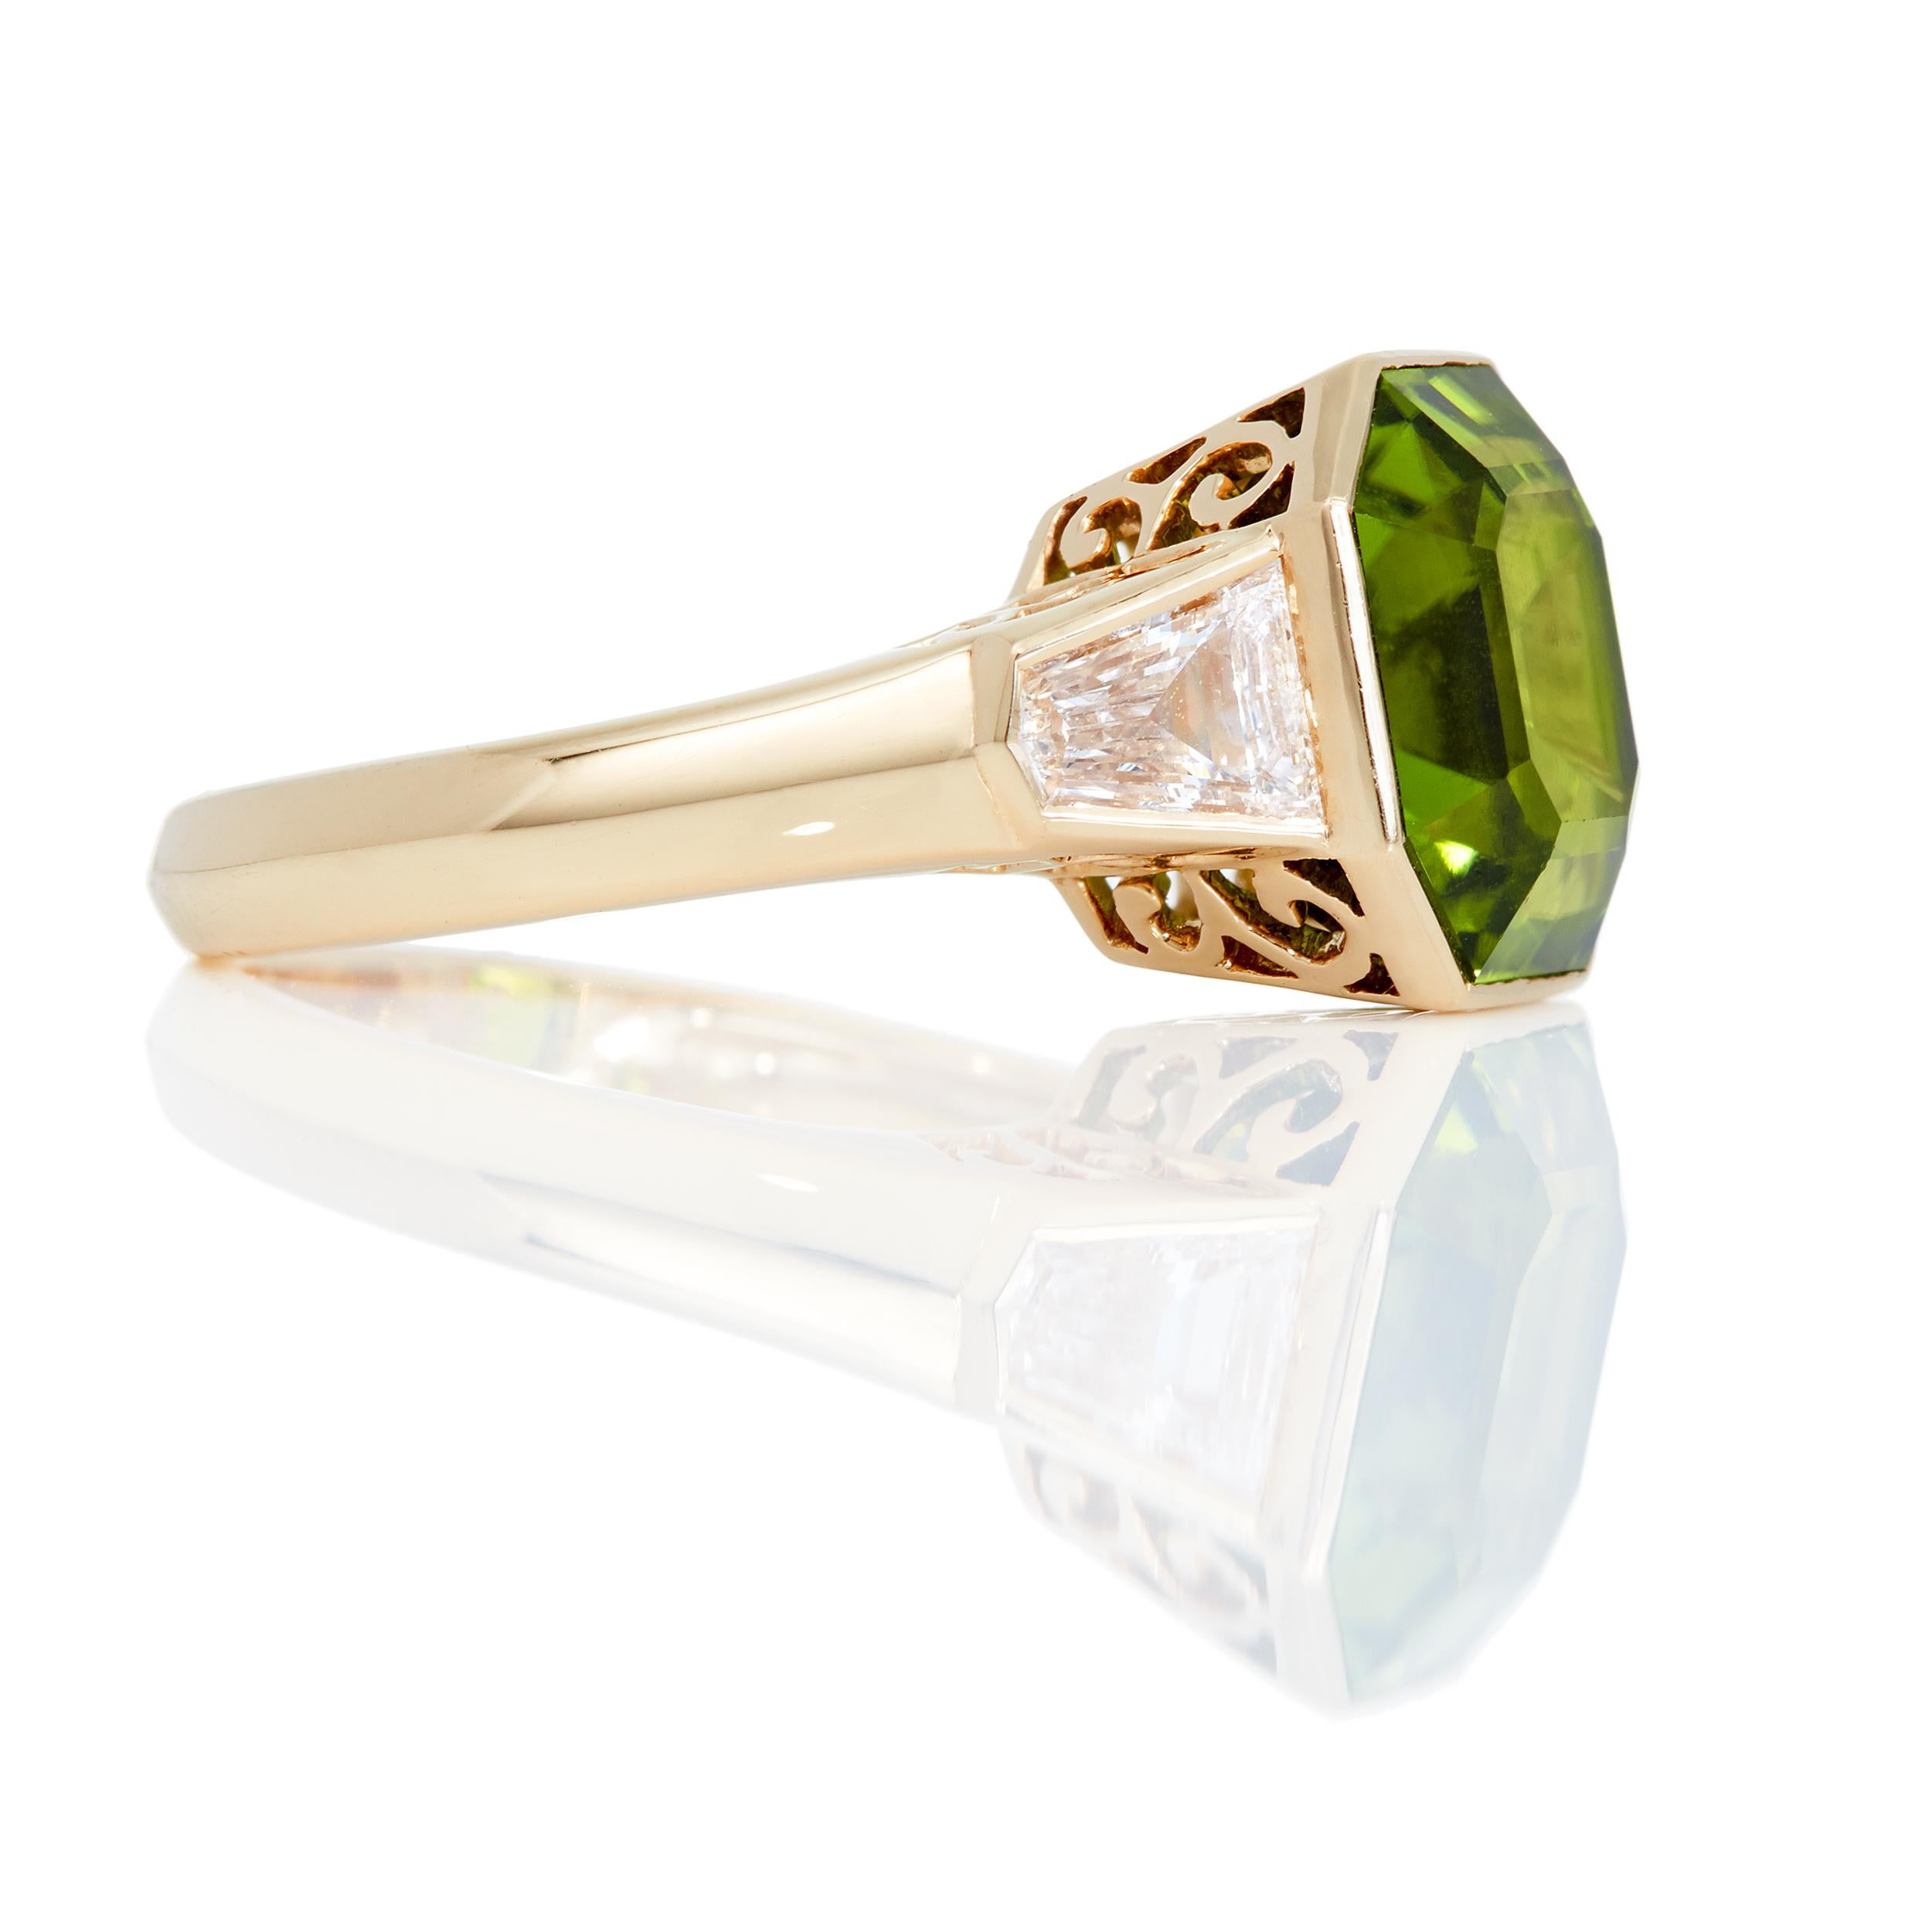 Rare to see such a beautifully cut Peridot as this one.  This ring features a stunning 7.0 Carat Asscher cut bezel set Peridot with 0.65 Carats of Bullet-shaped Diamonds on the side.  The filagree design in the profile ensures beauty from every